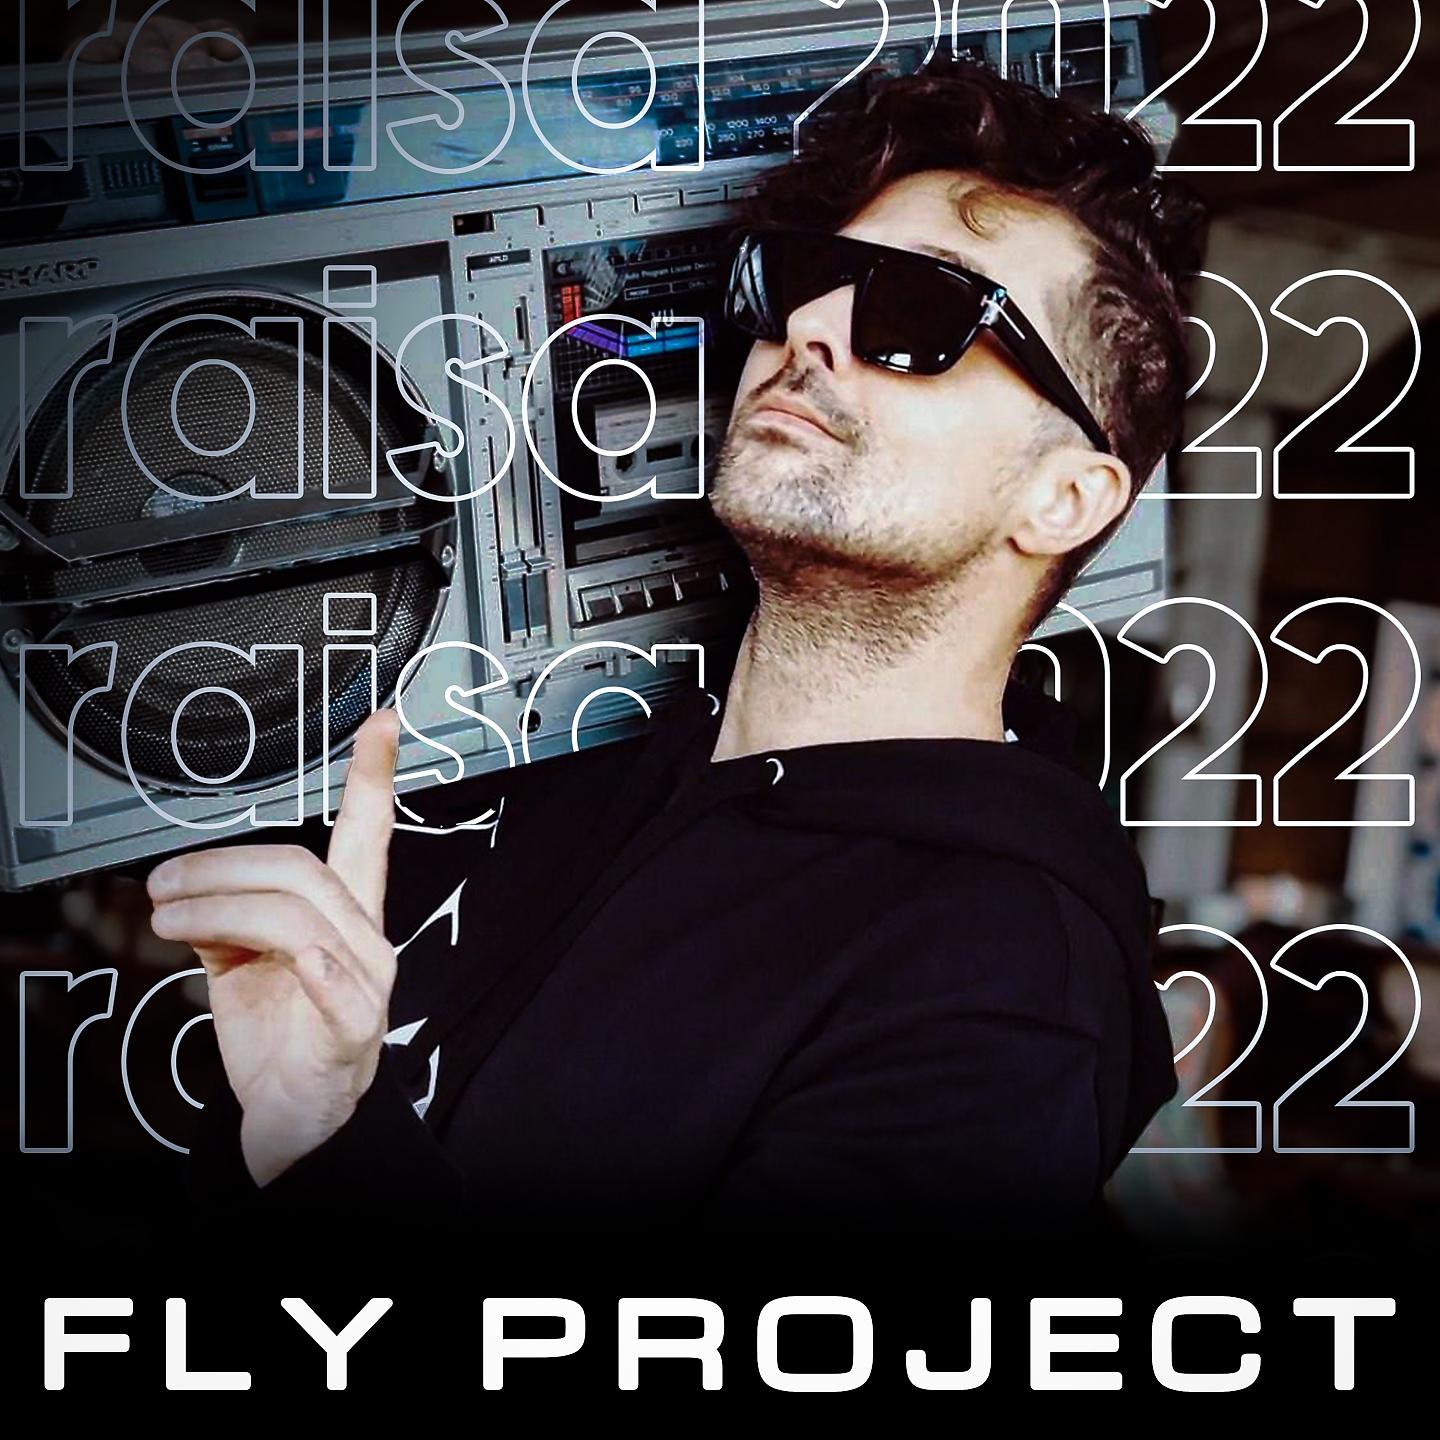 Музыка fly project. Fly Project 2022. Музыка 2022. Песня Fly Project. Музыка 2022 слушать.